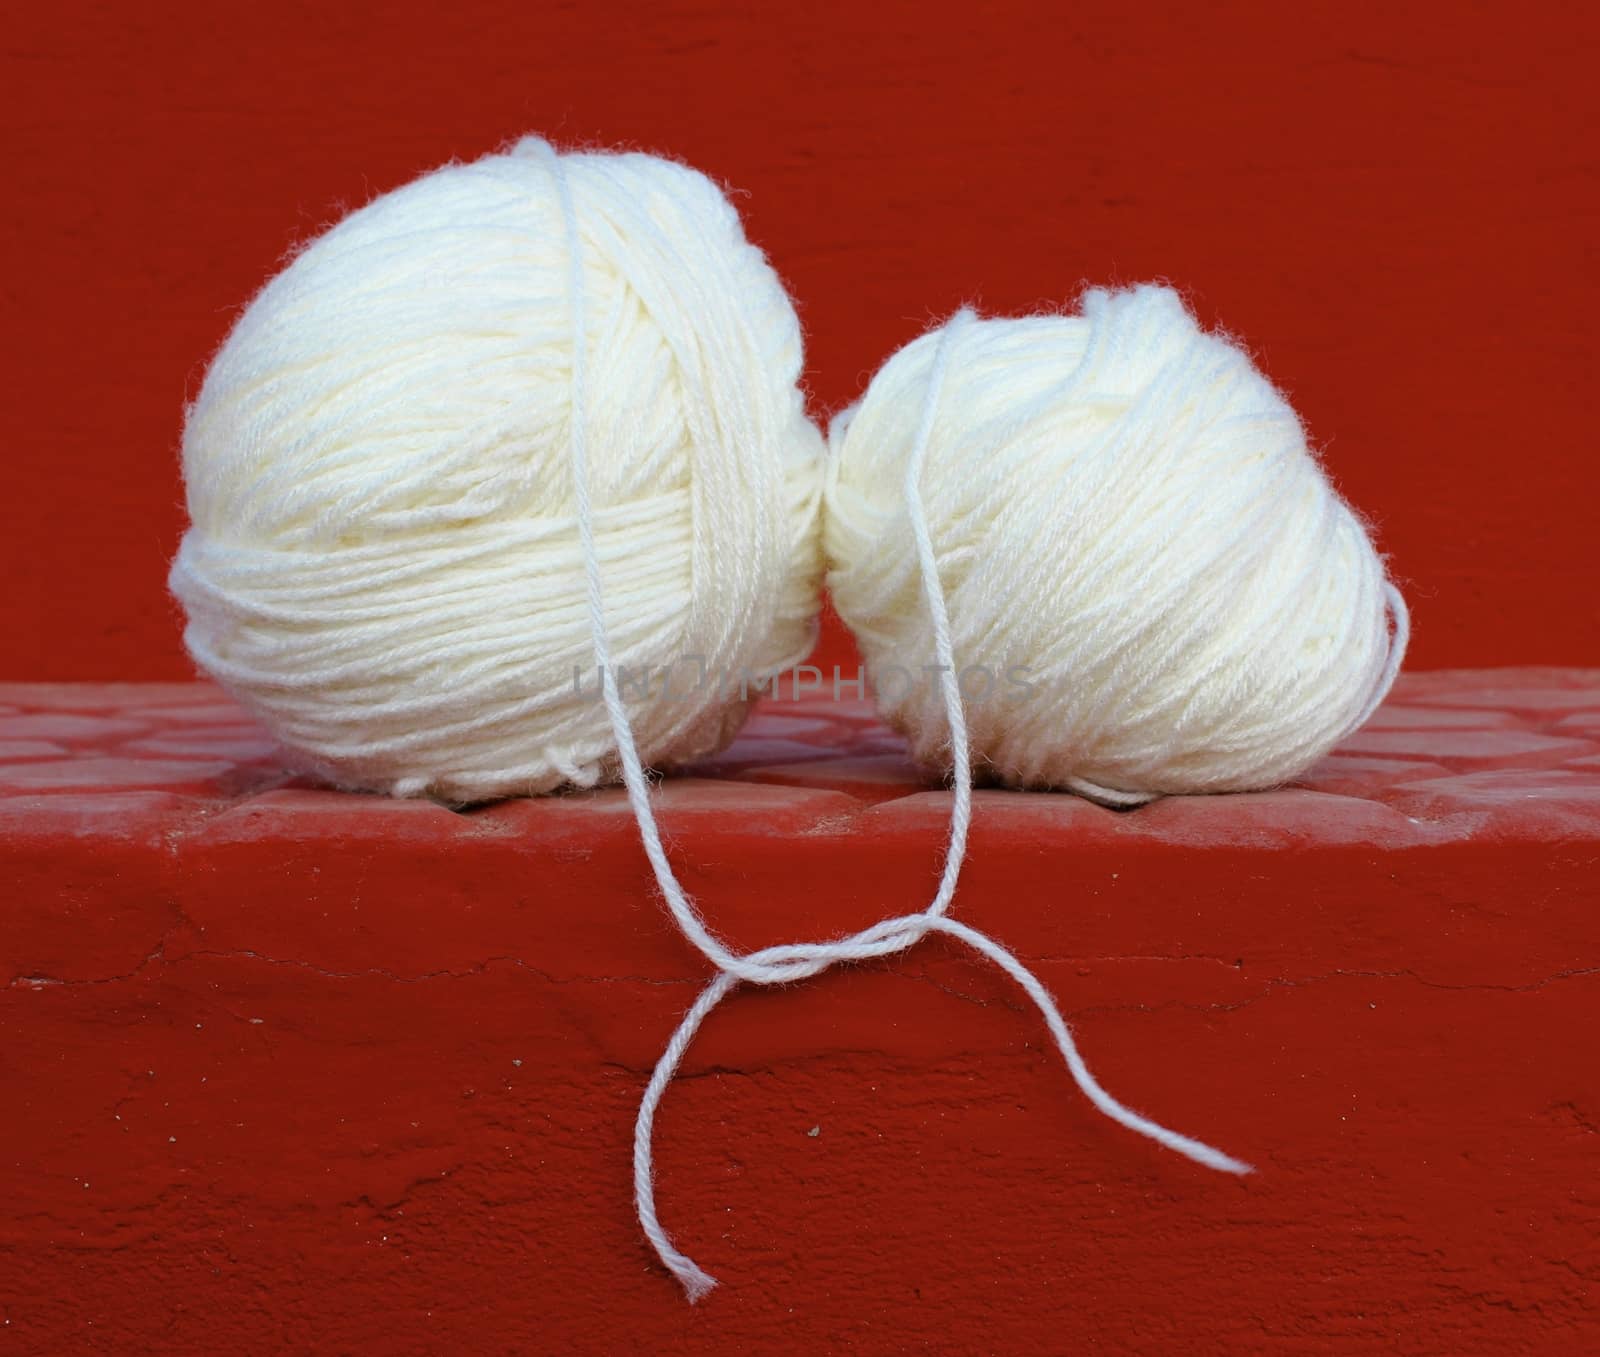 White Wool Balls Tied Up on Red Background by RichieThakur